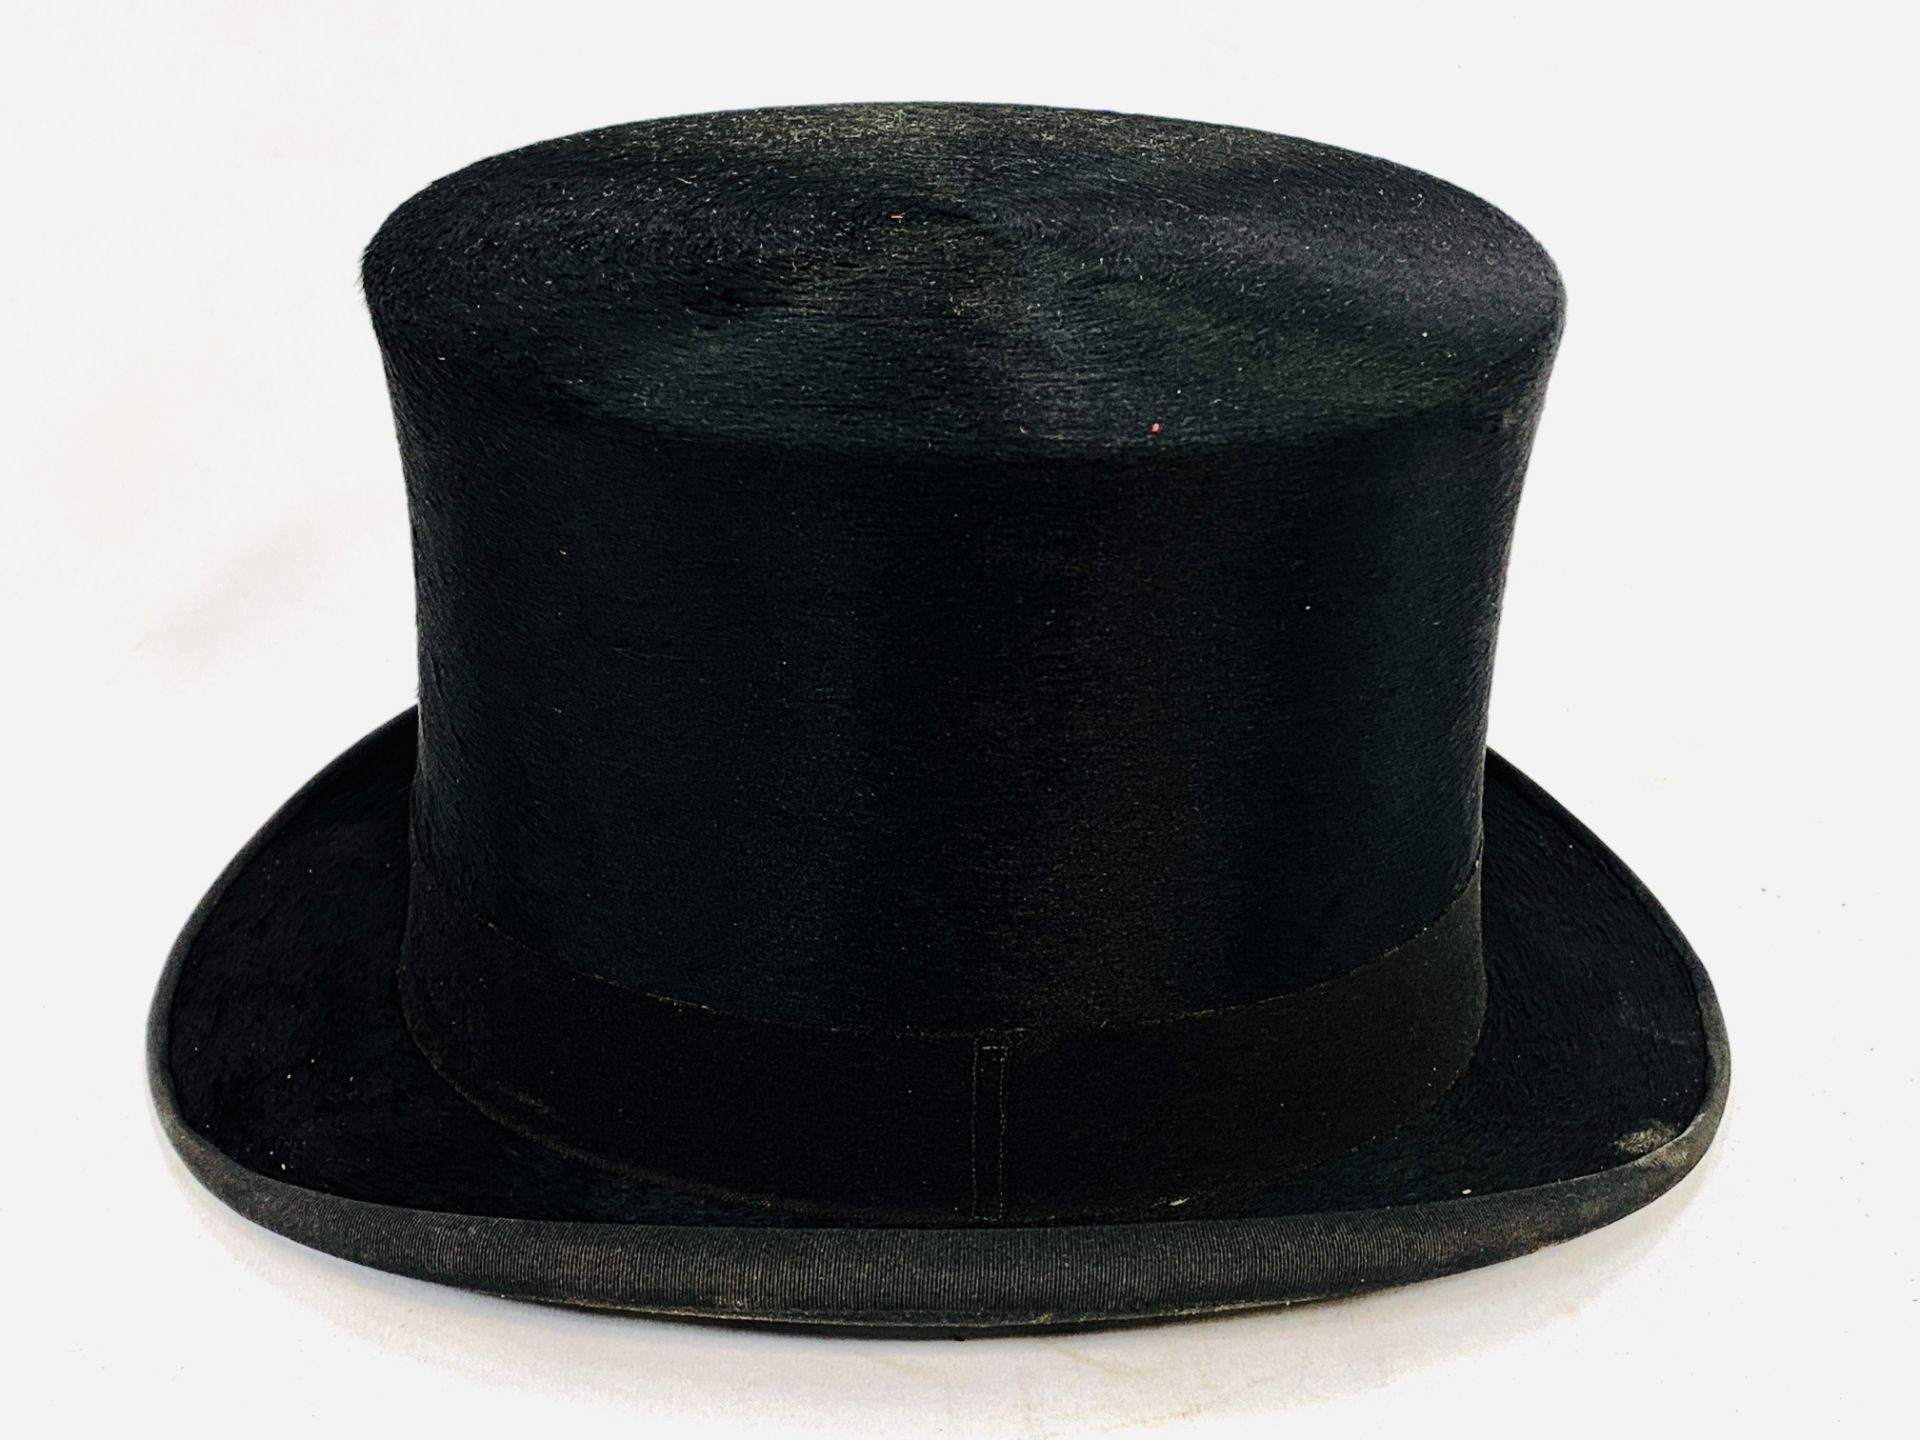 Black silk top hat by City Cork Hat Company Ltd. with leather hat box - Image 2 of 3